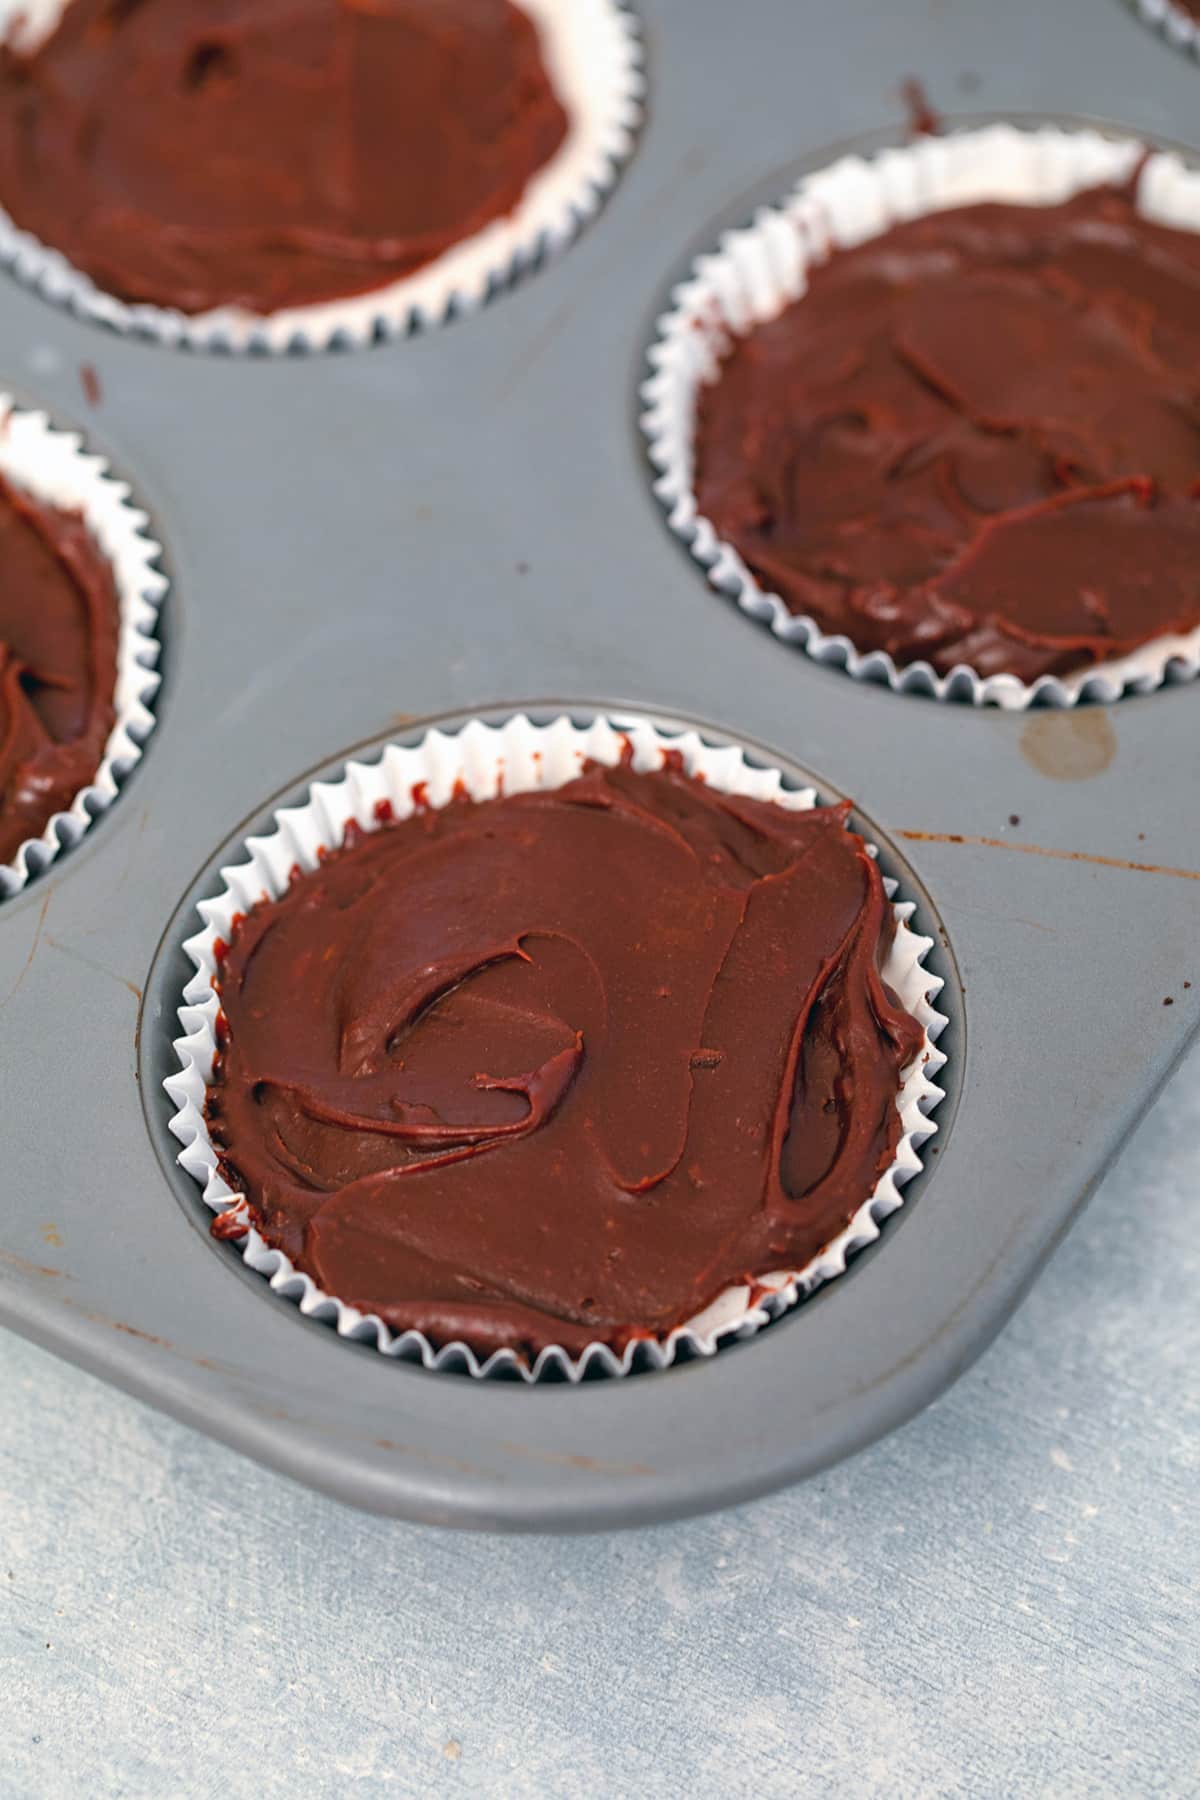 Chocolate fudge sauce smoothed over ice cream in cupcake papers in tin.